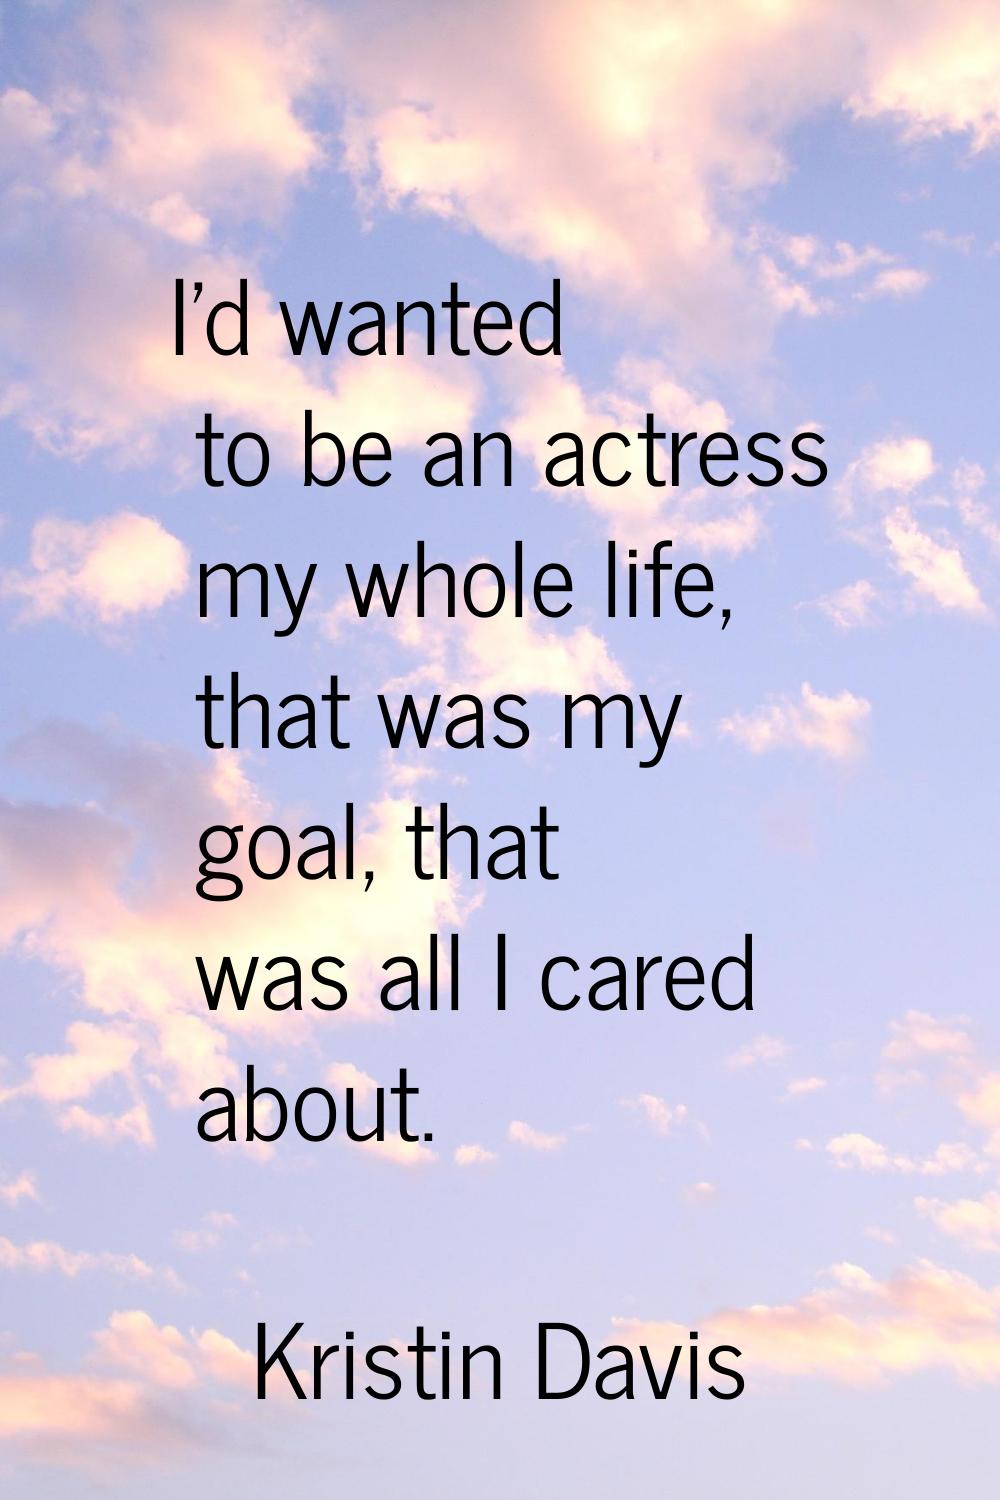 I'd wanted to be an actress my whole life, that was my goal, that was all I cared about.